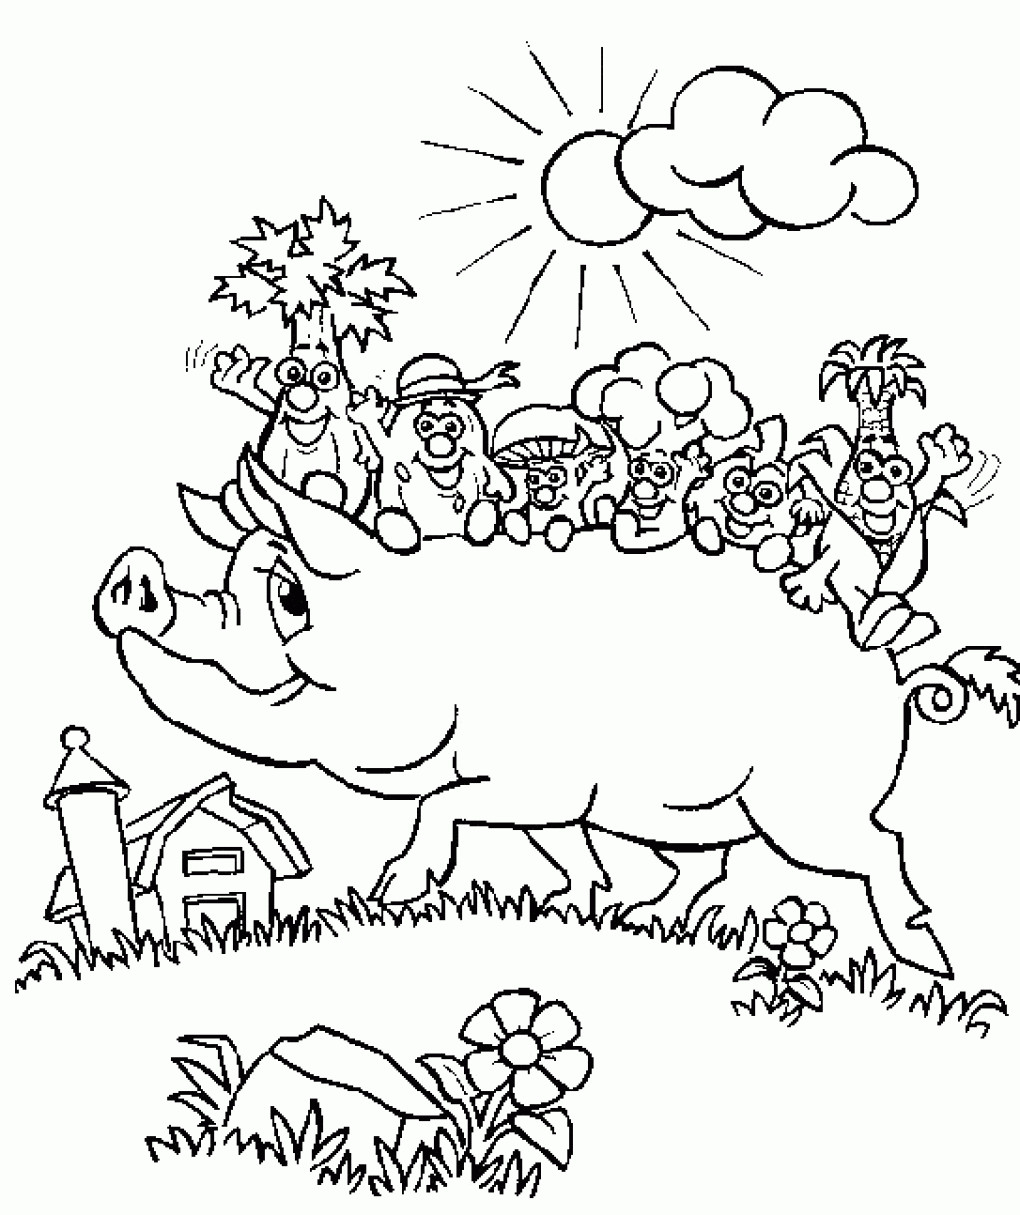 Pigs Coloring Pages
 Free Printable Pig Coloring Pages For Kids